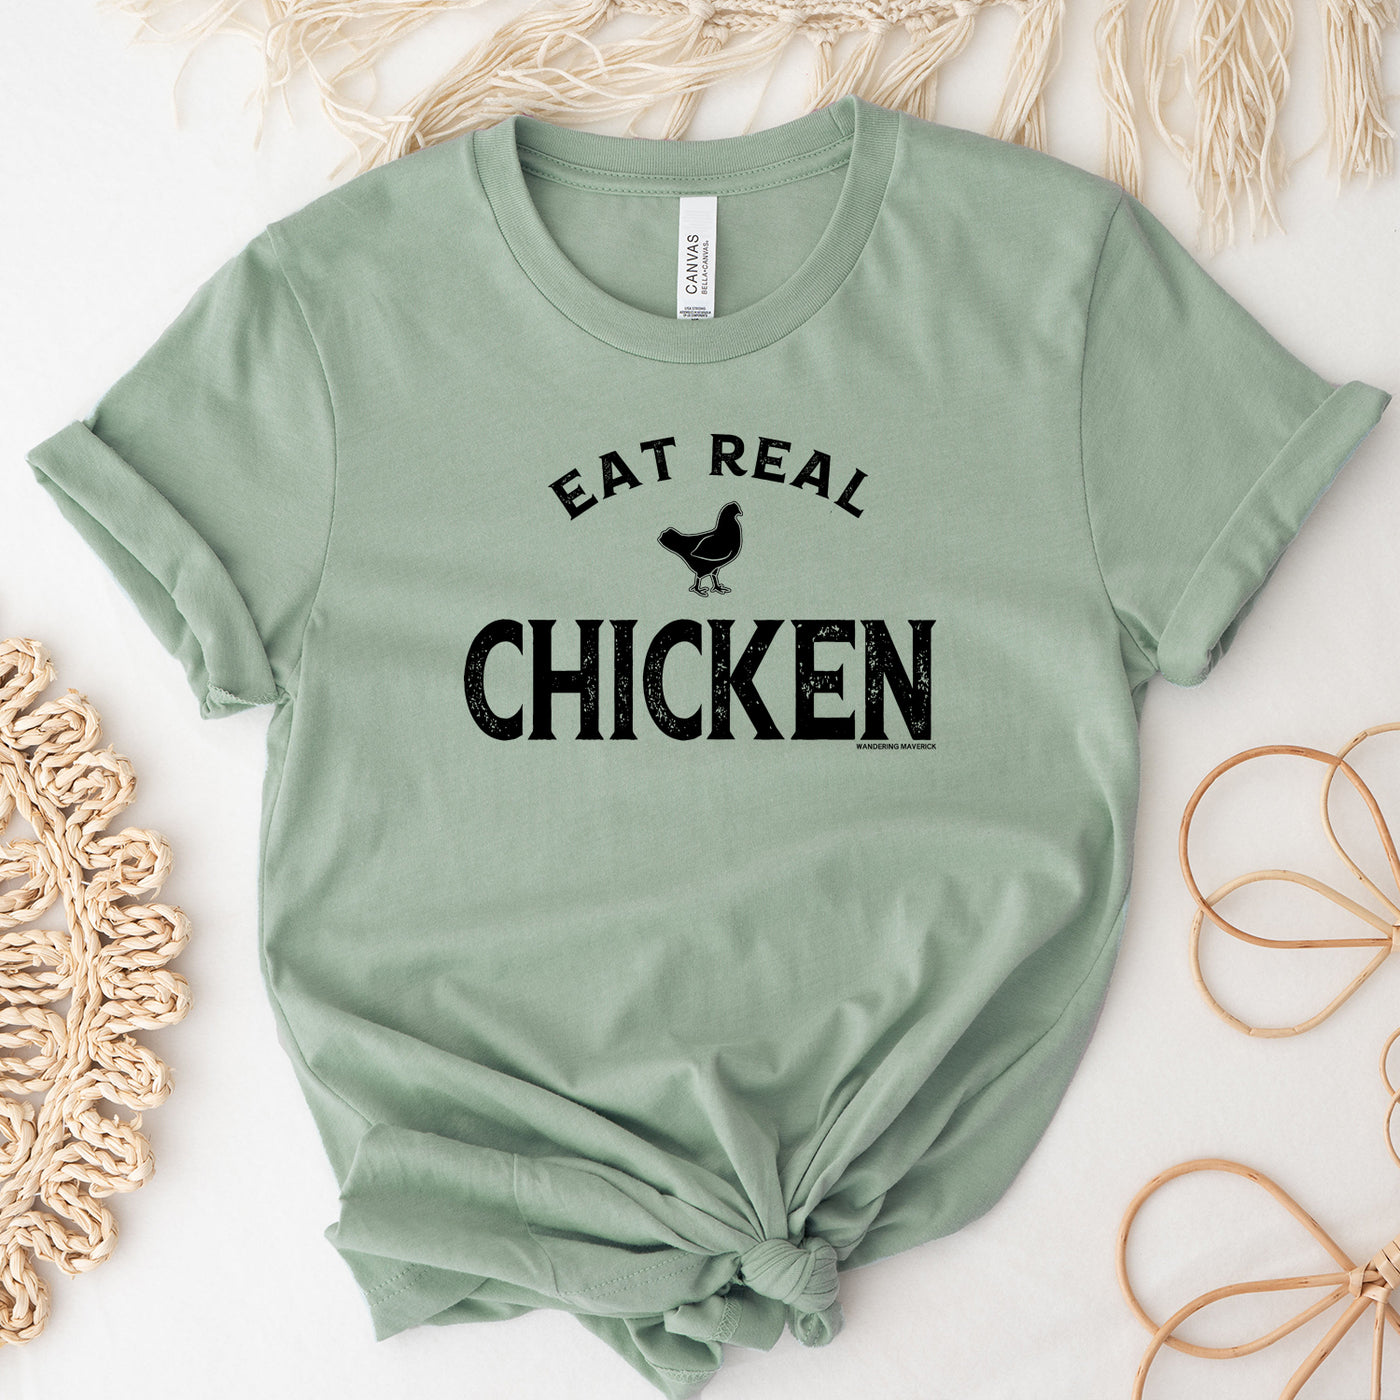 Eat Real Chicken T-Shirt (XS-4XL) - Multiple Colors!